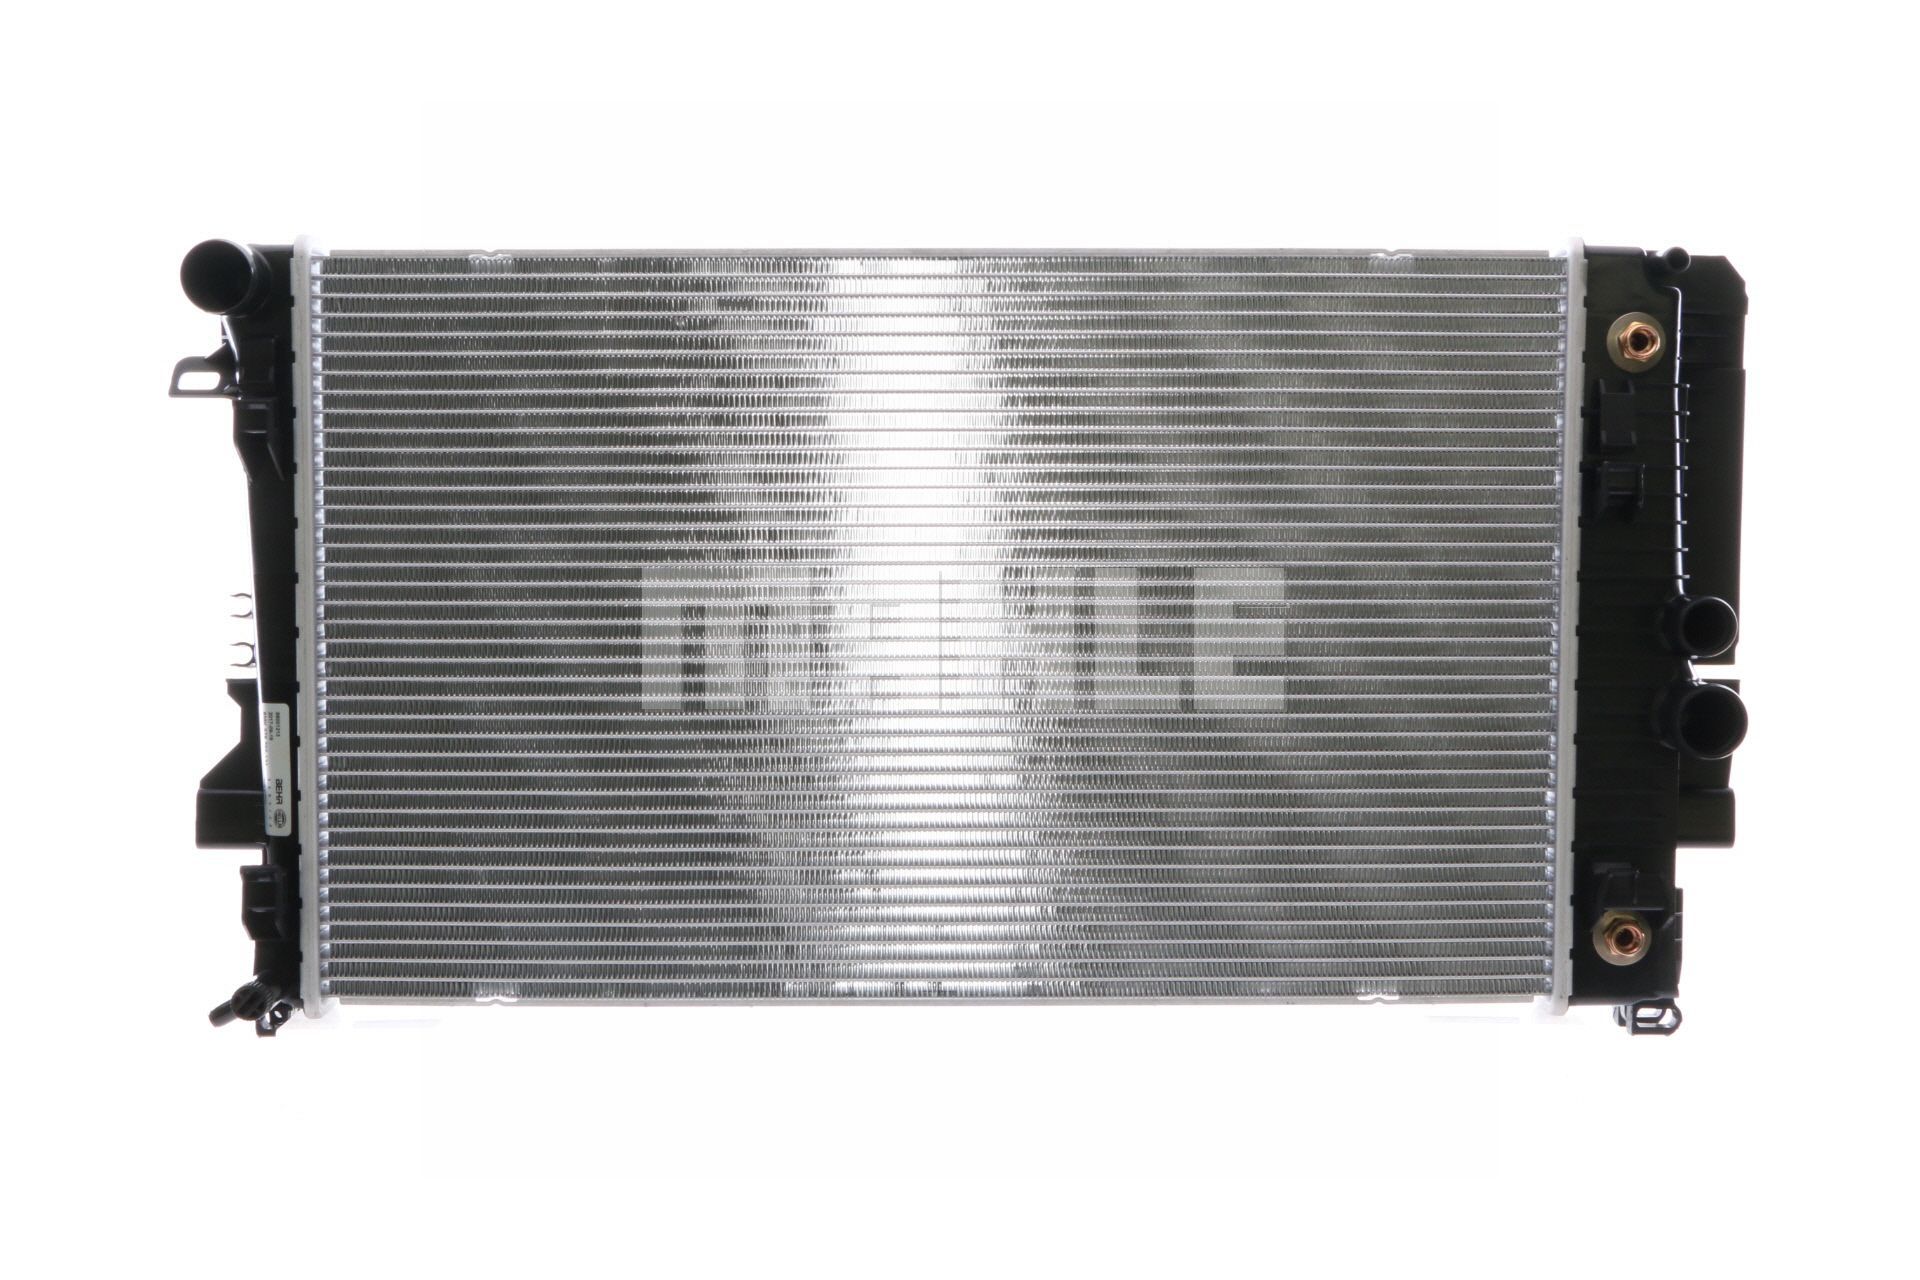 MAHLE ORIGINAL CR 1173 000S Engine radiator for vehicles with/without air conditioning, 650 x 388 x 32 mm, Automatic Transmission, Brazed cooling fins